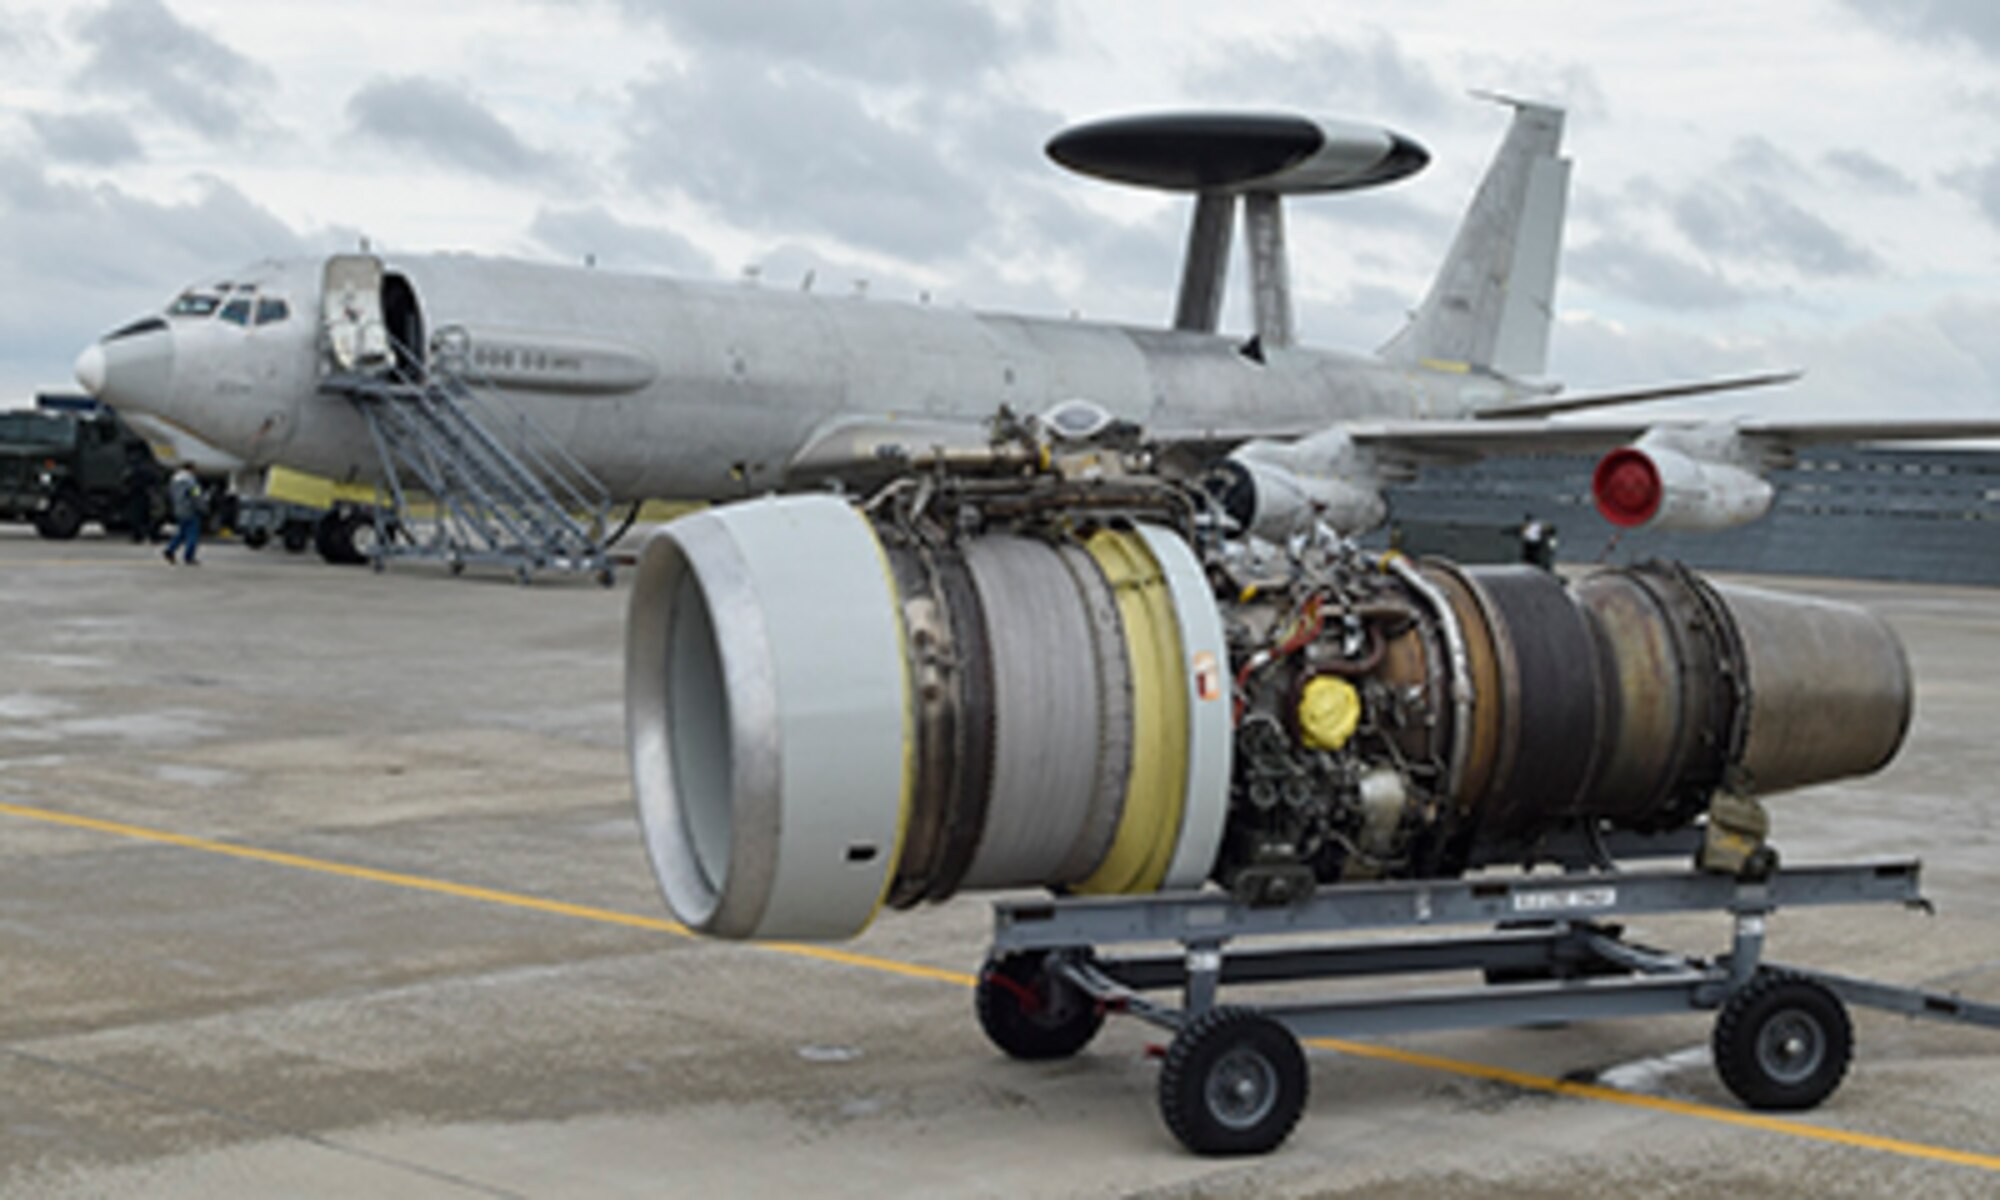 A Pratt & Whitney TF33 engine sits on a transport cart at the Oklahoma city Air Logistics Complex May 23, 2017, Tinker Air Force Base, Oklahoma. The TF33 shown is the type which powers the E-3 Airborne Warning and Control System and is one of the oldest engine families in the U.S. Air Force inventory. (U.S. Air Force photo/Greg L. Davis)